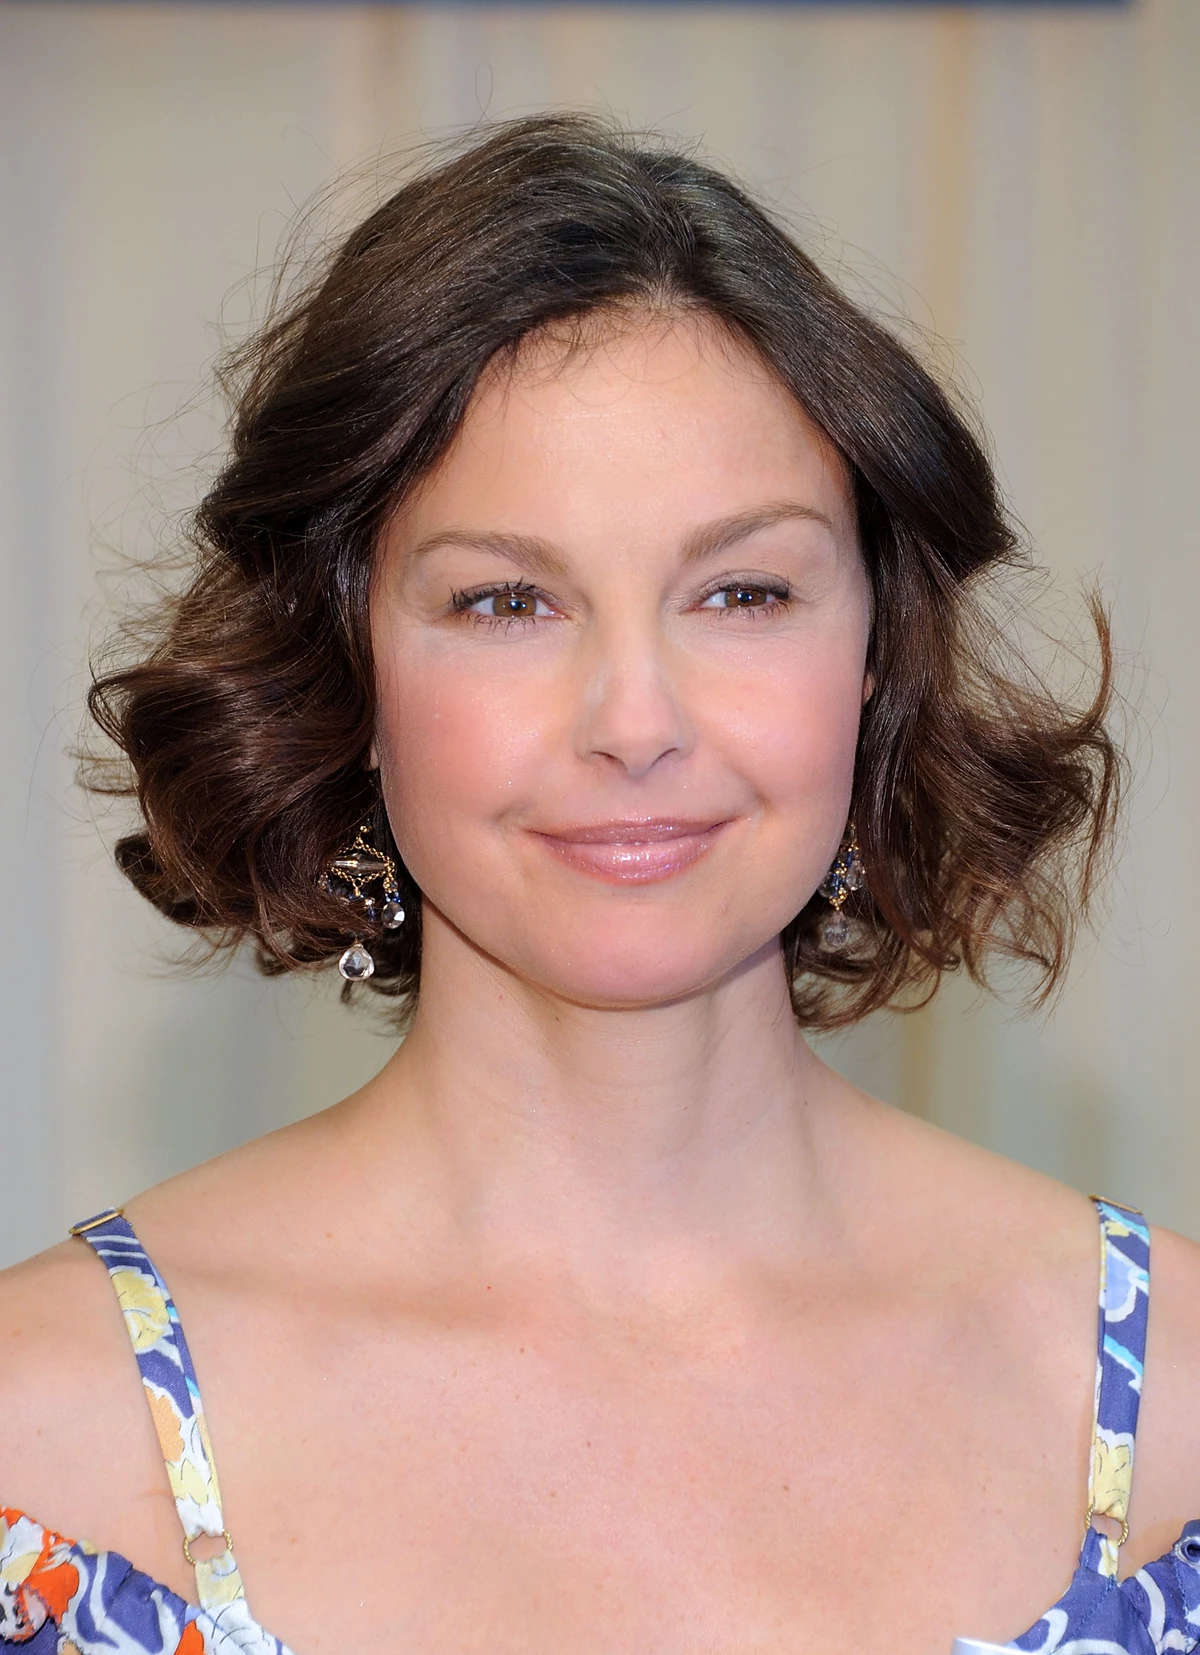 Ashley Judd Speaks Out About Twitter Harassment, Sexual Assault | TIME